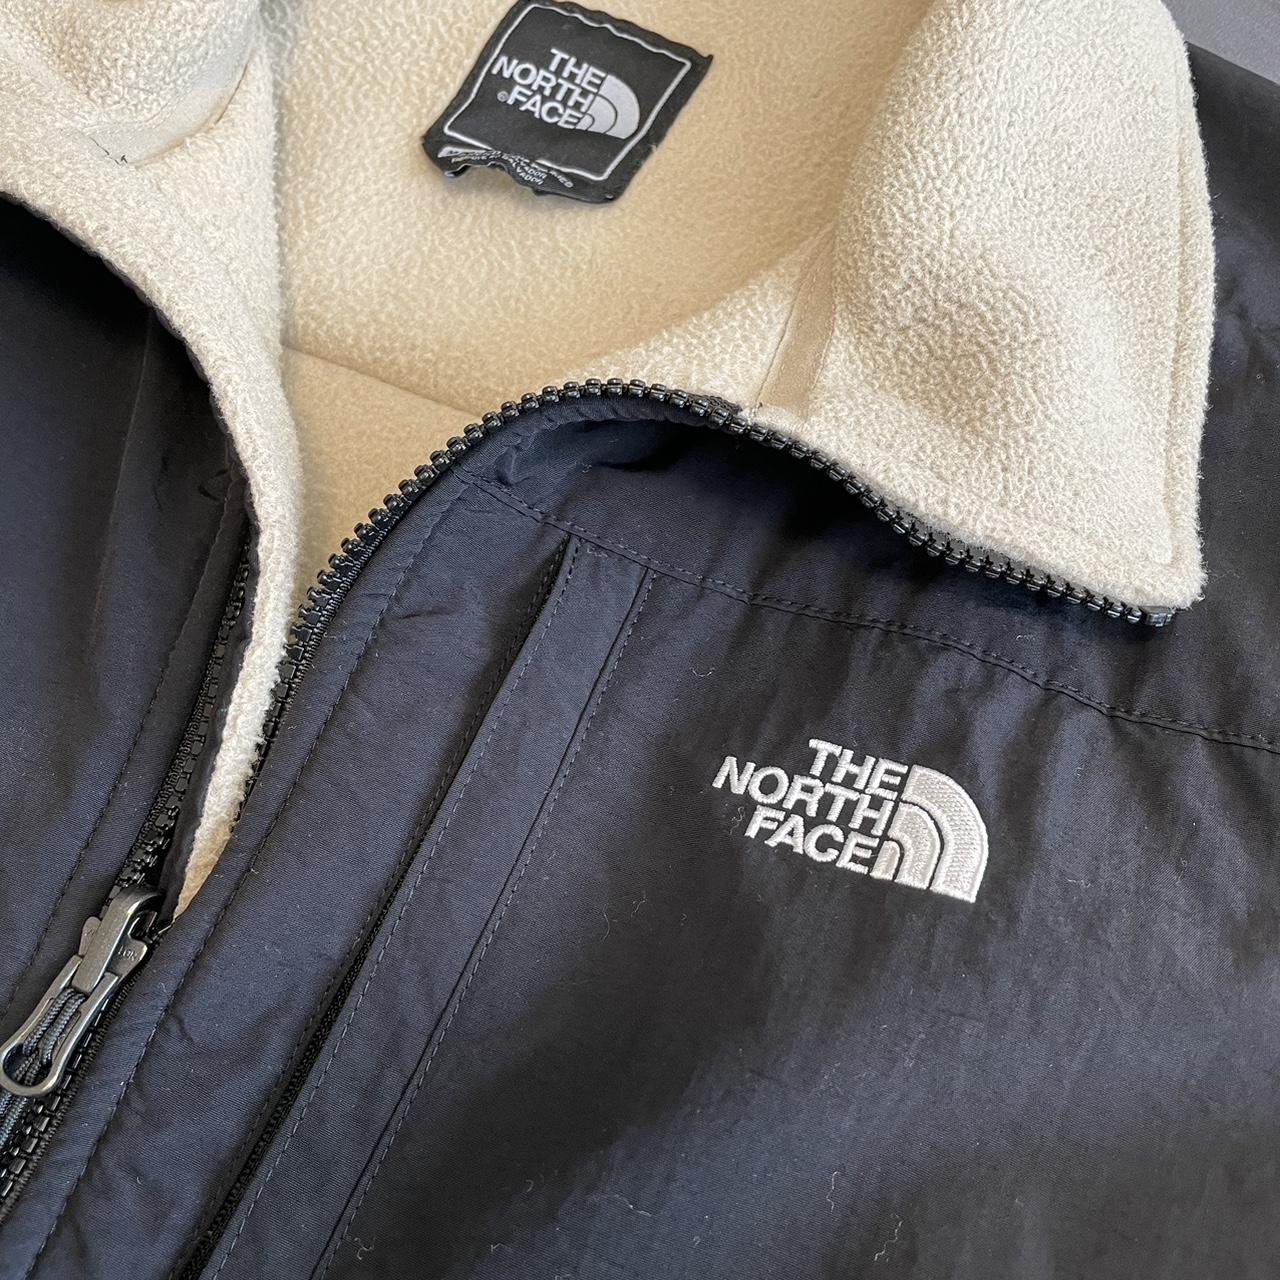 The North Face Women's Cream and Black Jacket (3)